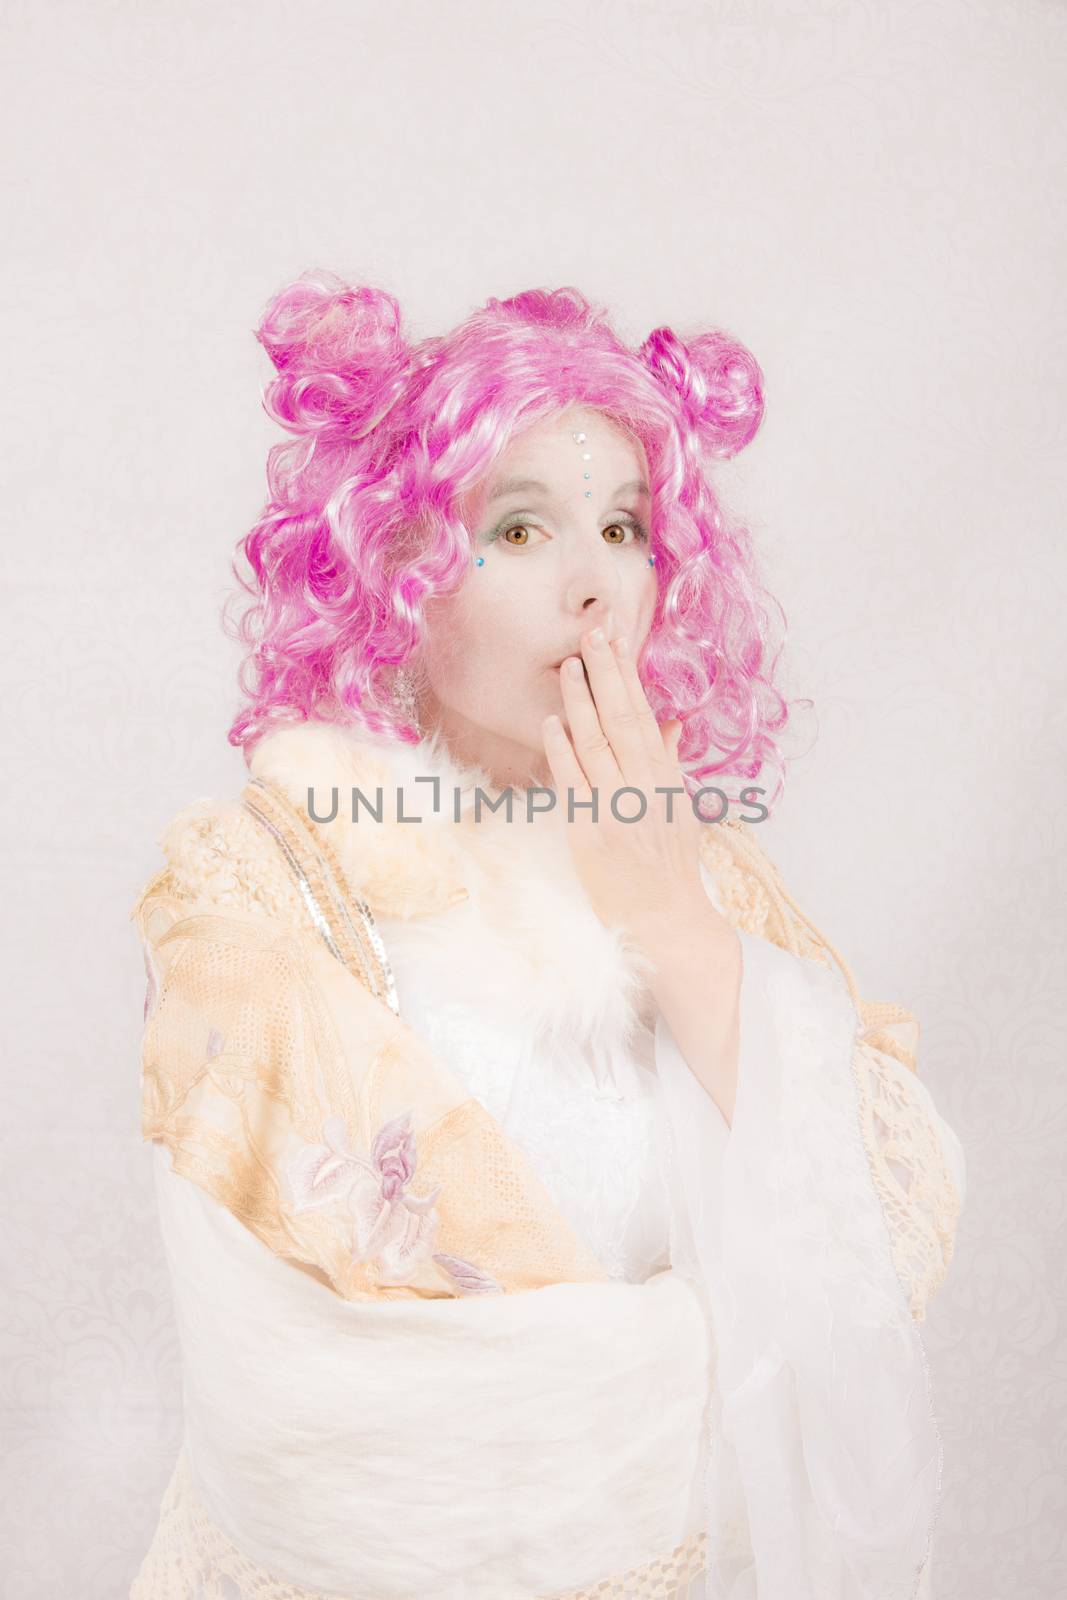 Shocked surreal circus style character on white background